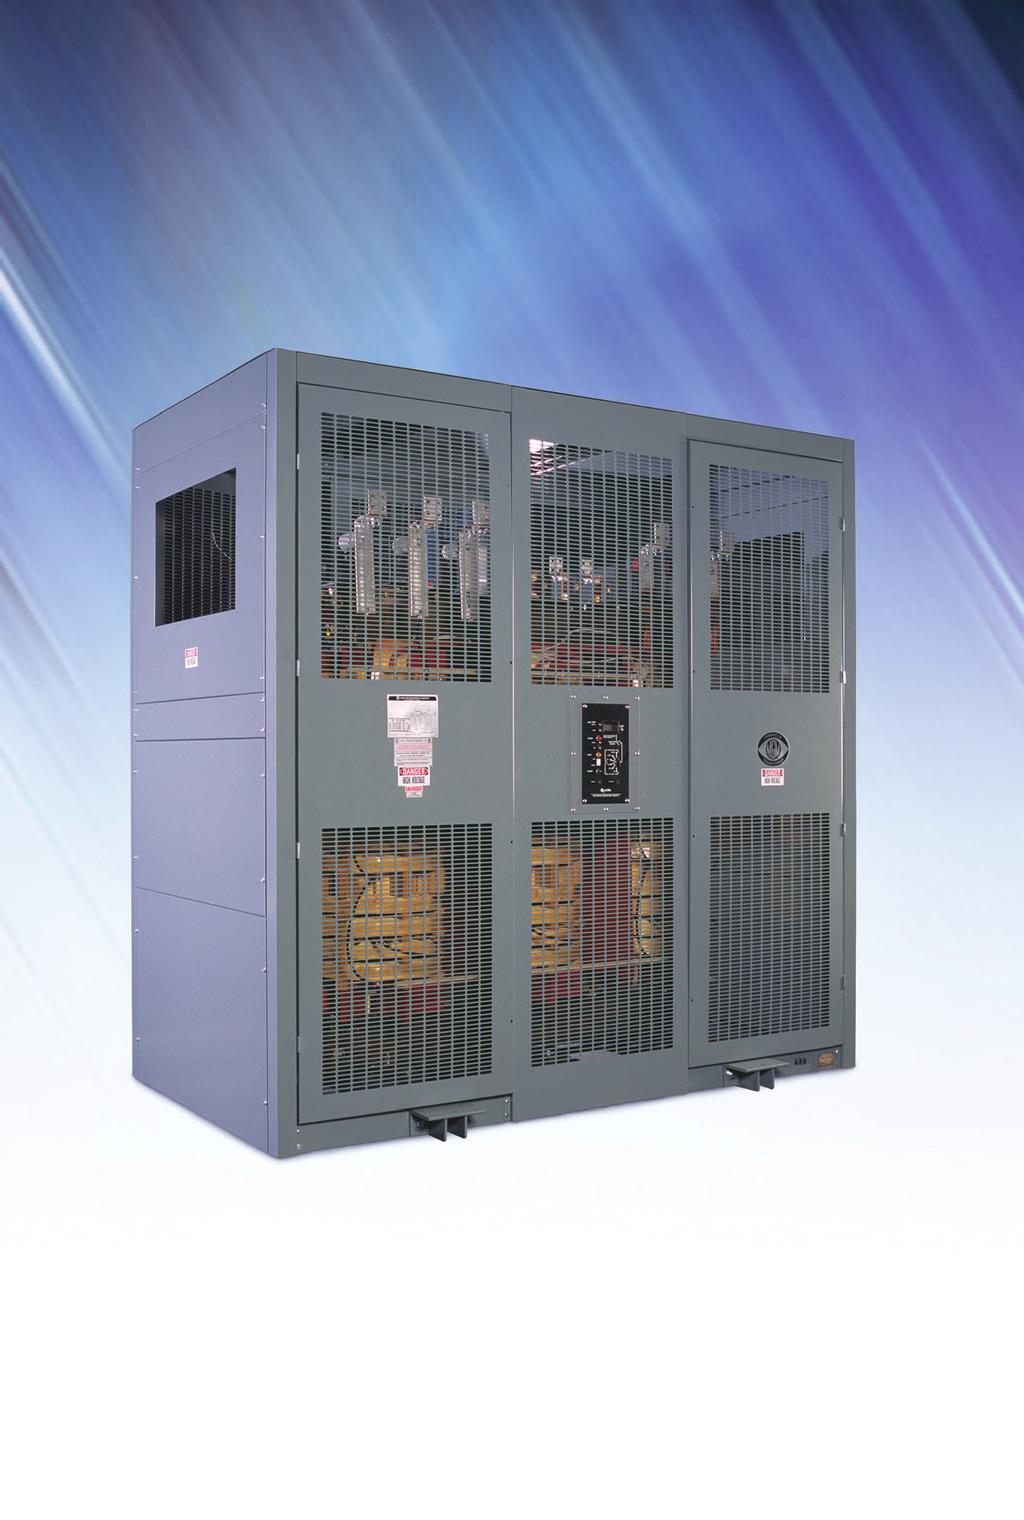 Ventilated Dry-Type Transformers Height Safe, Convenient and Environmentally Sound Installations of ventilated dry-type transformers do not require a liquid confinement area, automatic fire